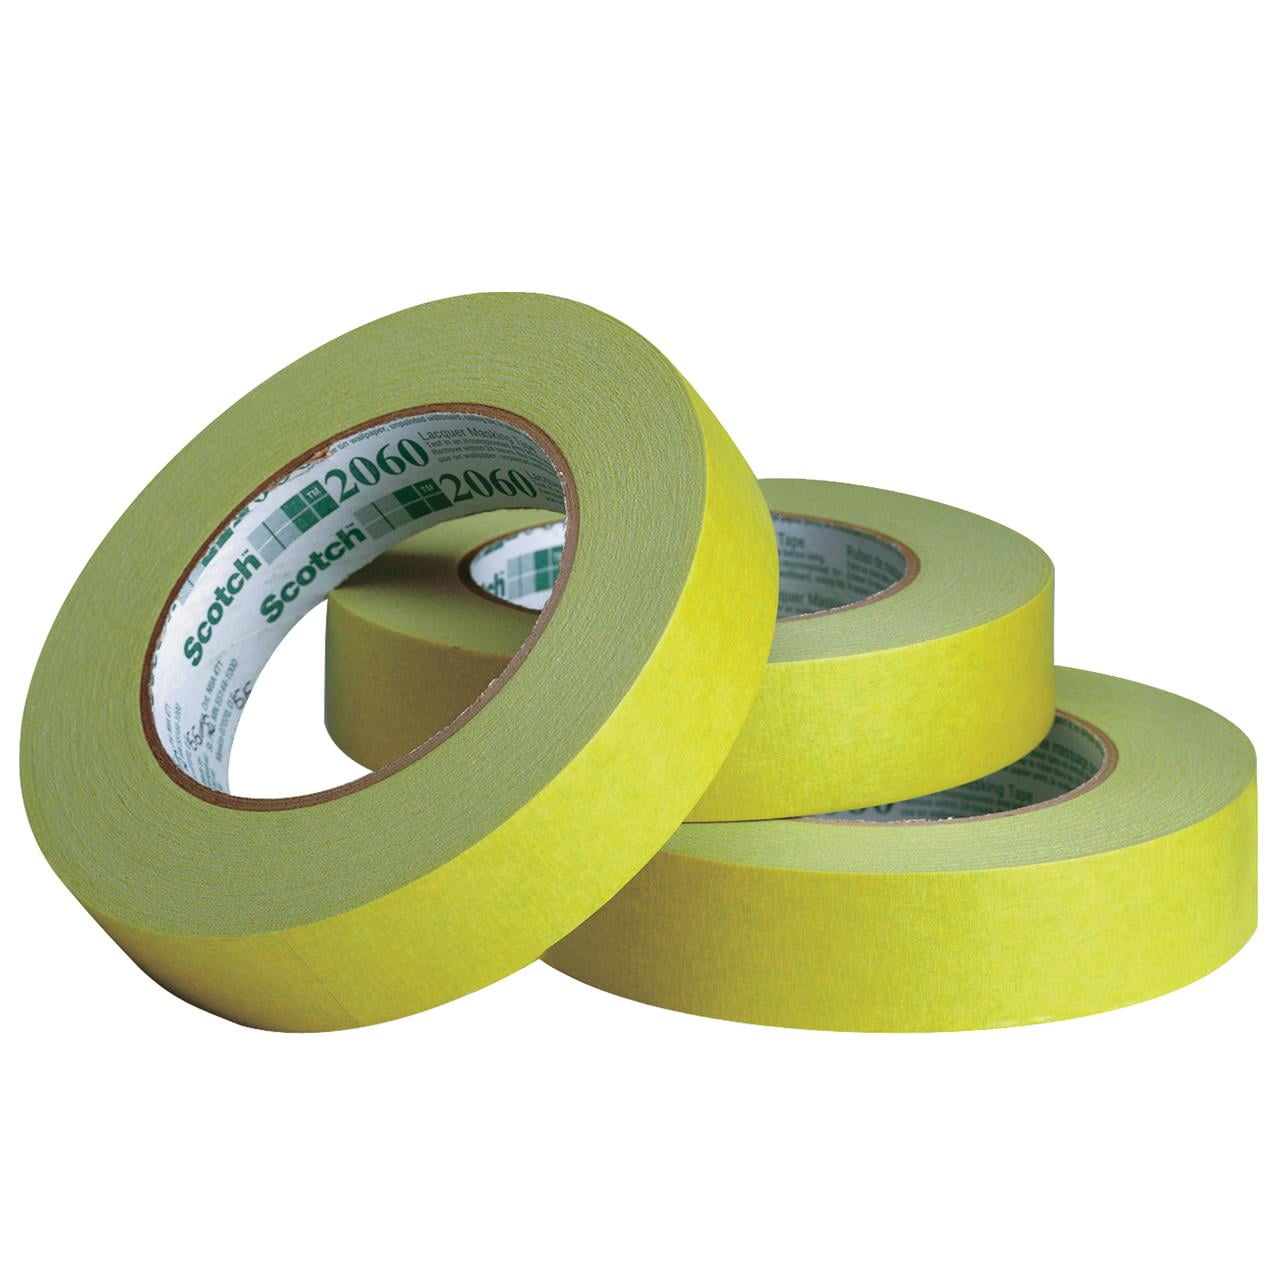 SCOTCH CORPORATION Scotch T937206012PK 2 in. x 60 yards 2060 Masking Tape, Green - Pack of 12